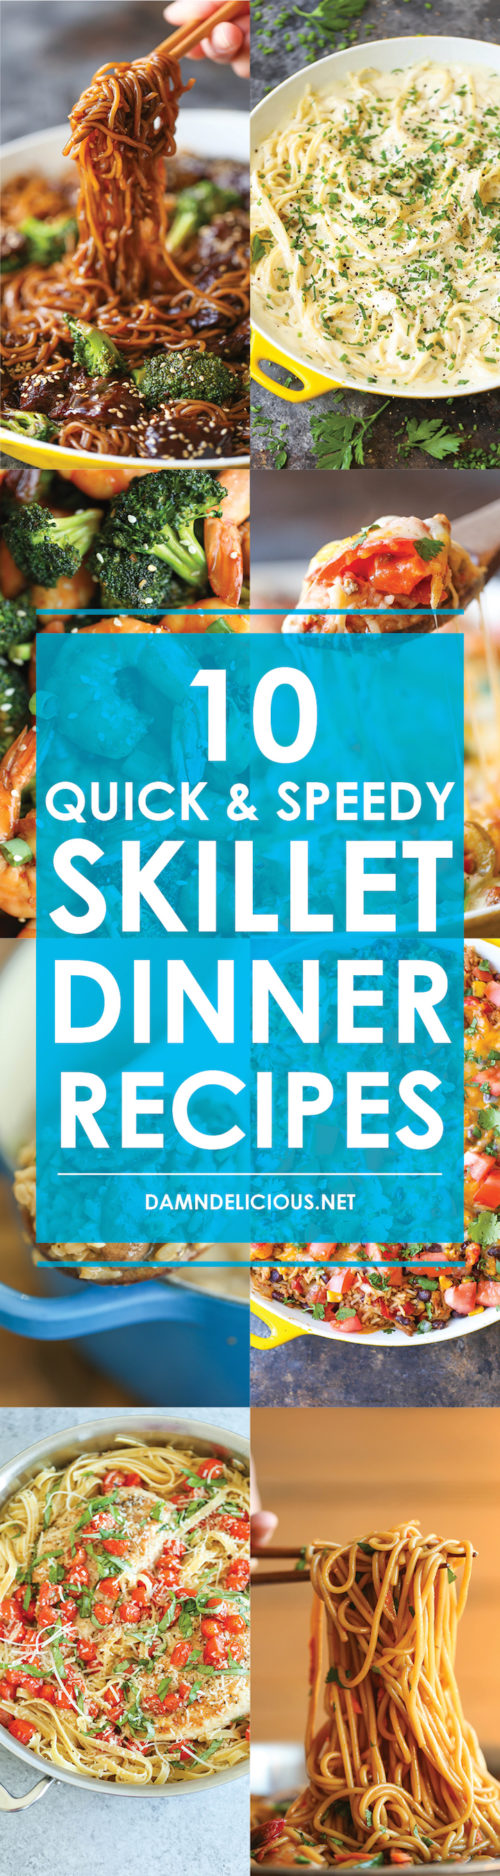 10 Quick and Speedy Skillet Dinners - Damn Delicious